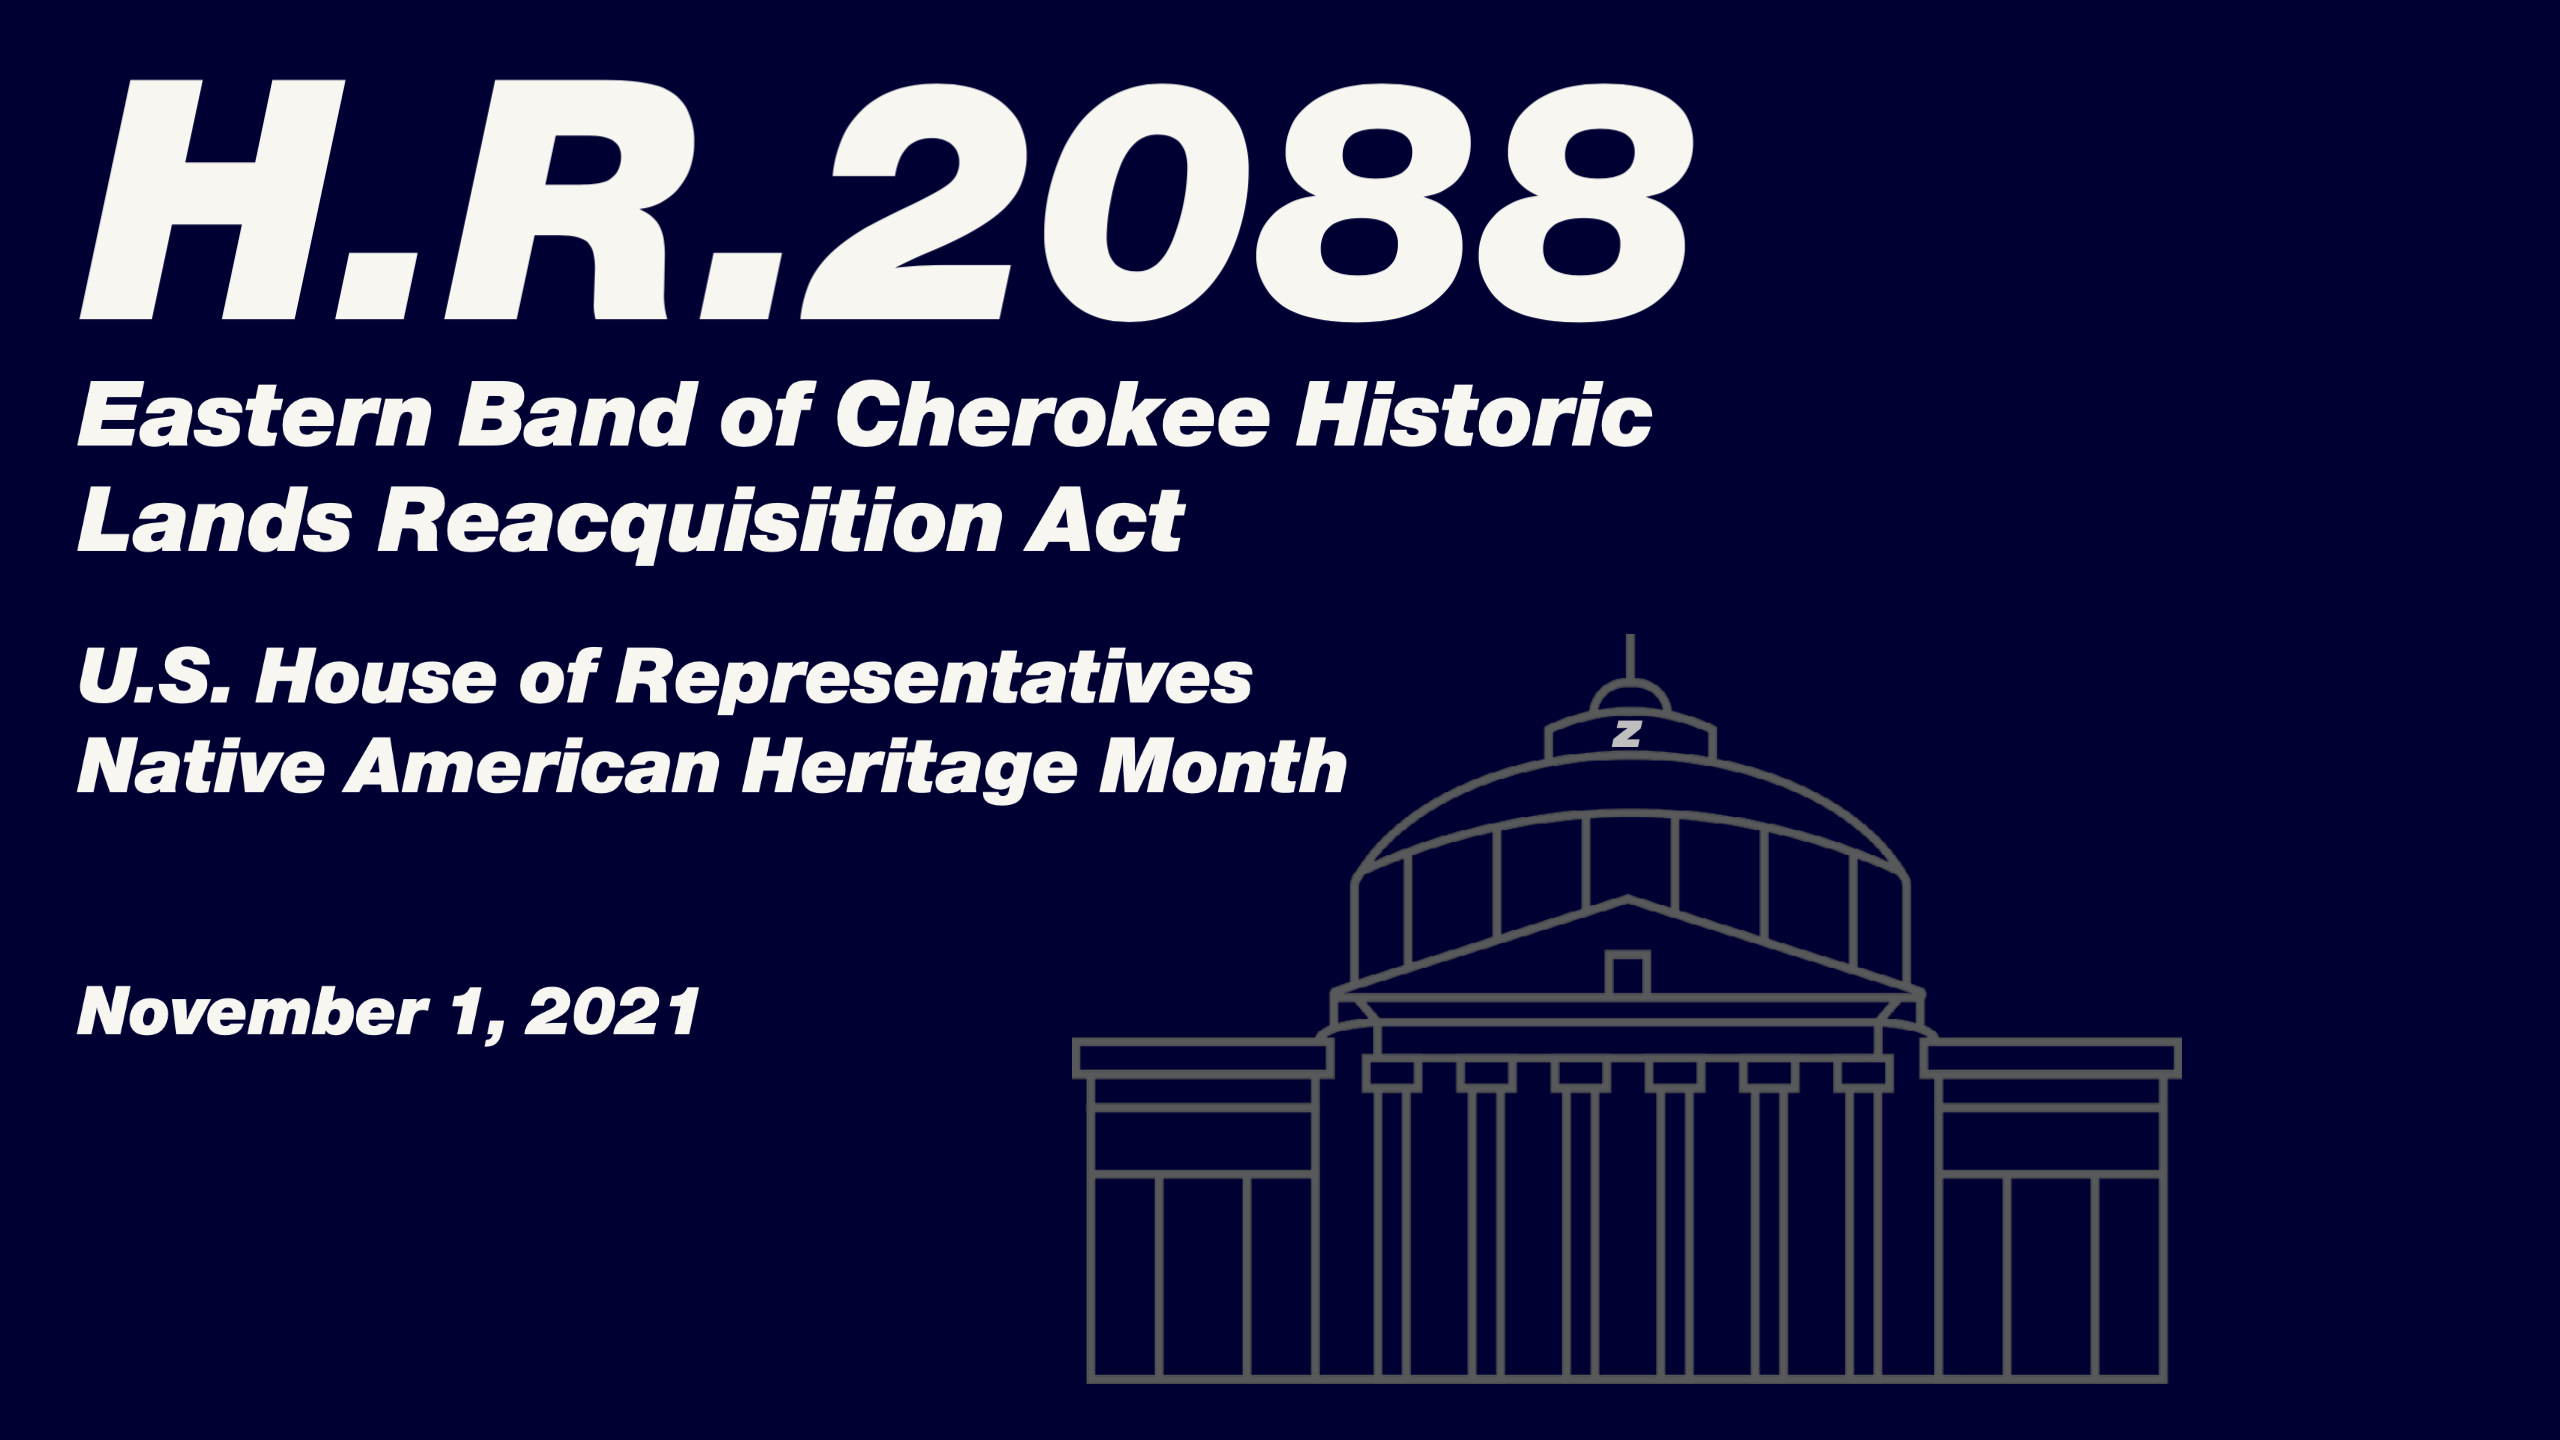 H.R.2088 - Eastern Band of Cherokee Historic Lands Reacquisition Act